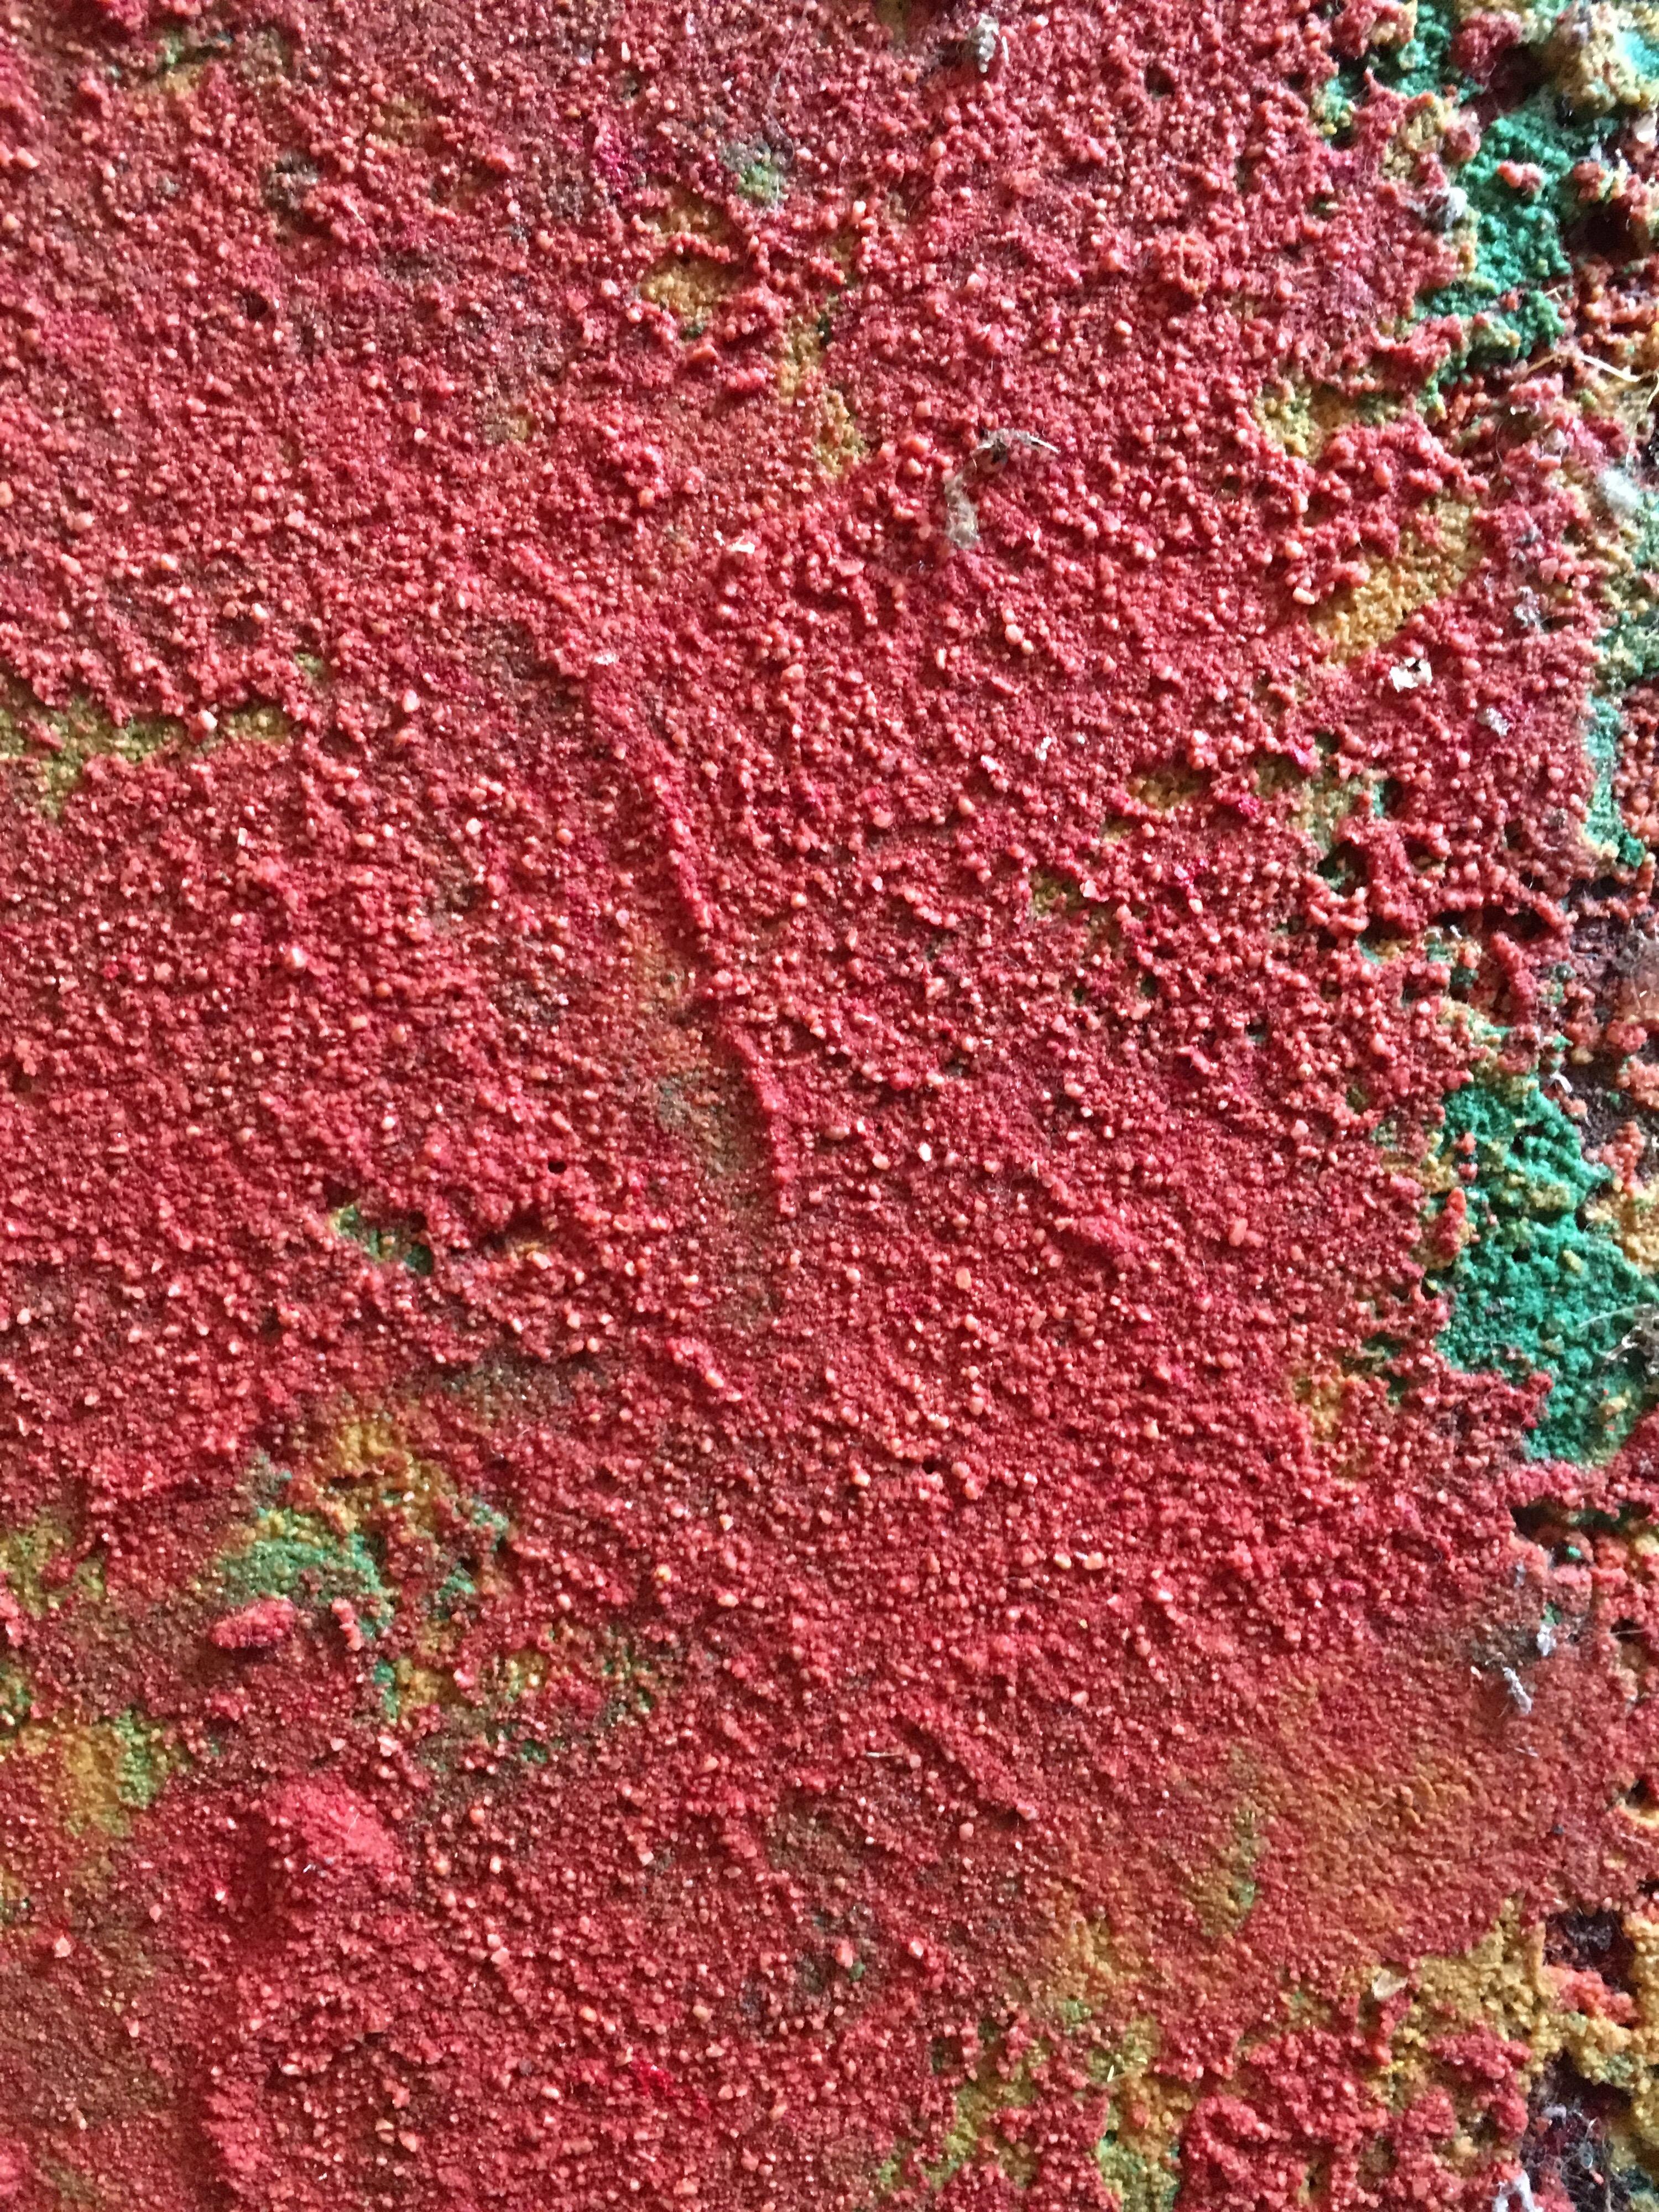 Large Red Block Abstract, Mixed Medium, Original Painting
French School, c. 1990's
signed indistinctly on the bottom of the painting
Mixed medium on canvas, unframed
Canvas size: 40 x 29 inches

Colourful painting that is fabulously understated. The